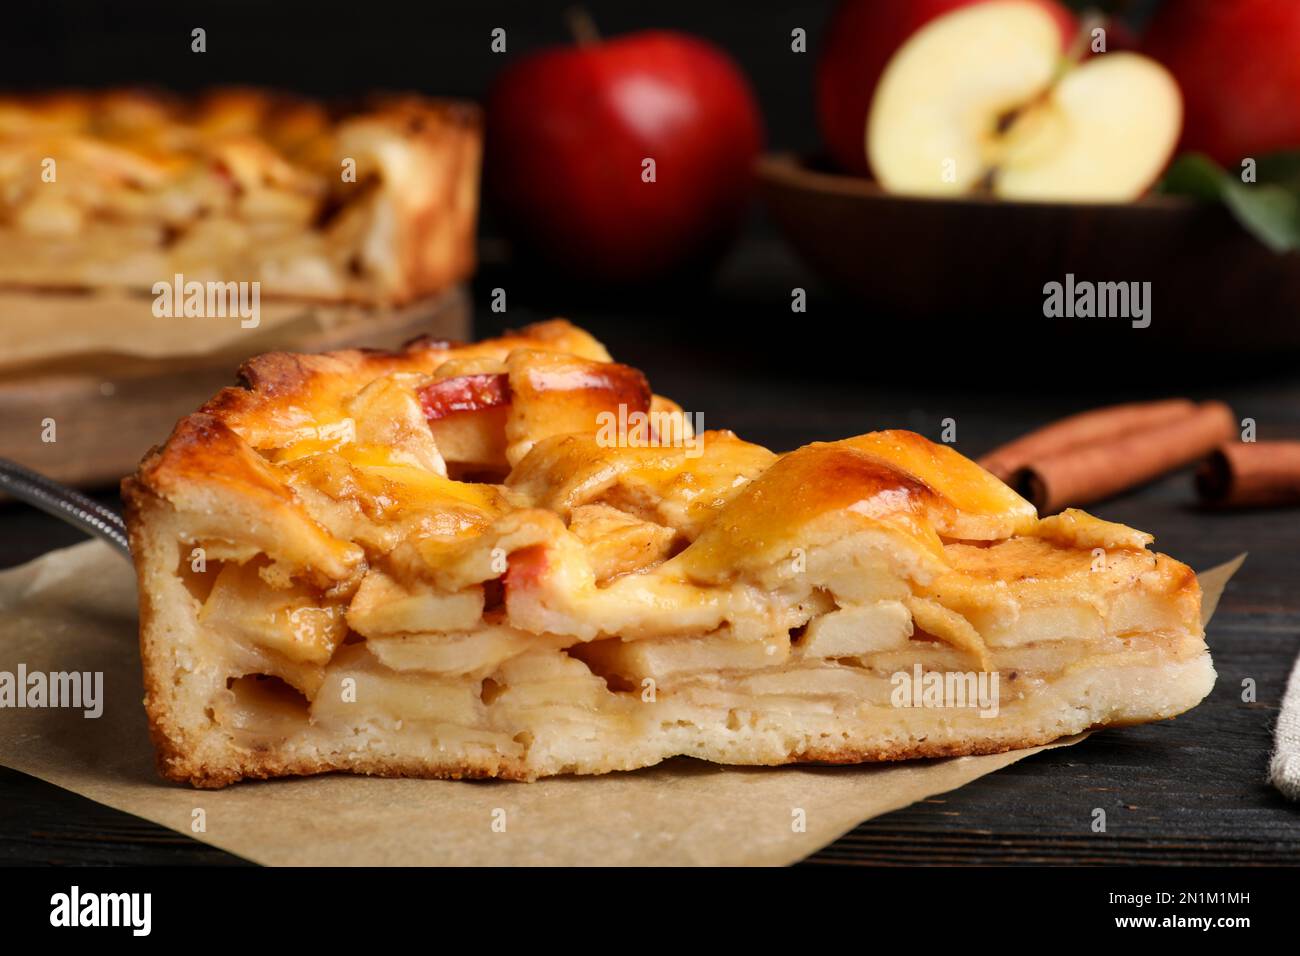 Slice of traditional apple pie on black wooden table, closeup Stock Photo